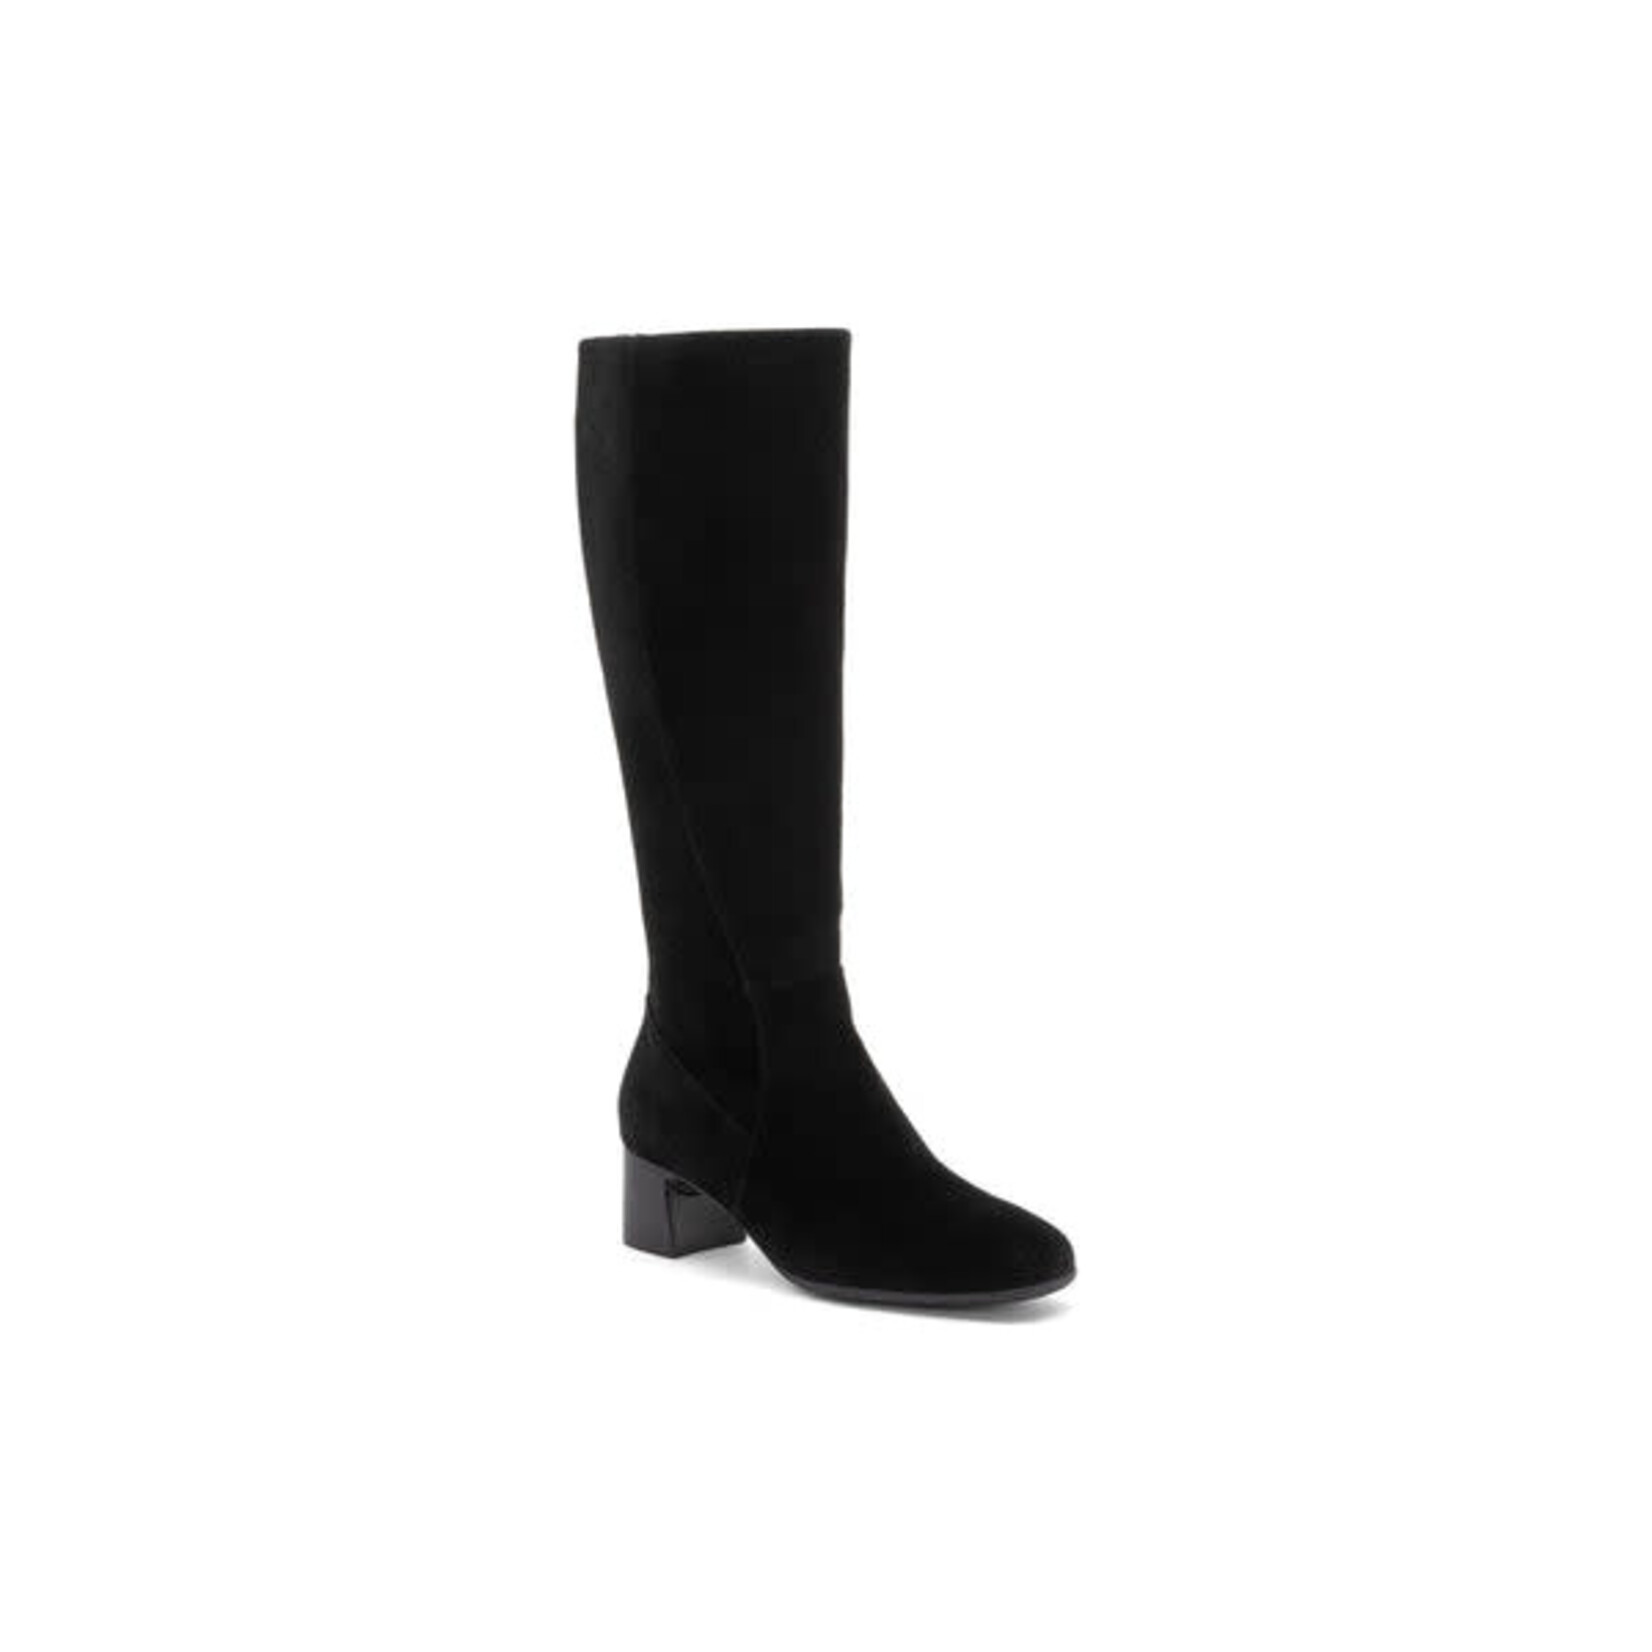 ABEO Avenue Tall Black Suede Boots 2" Heel by ABEO